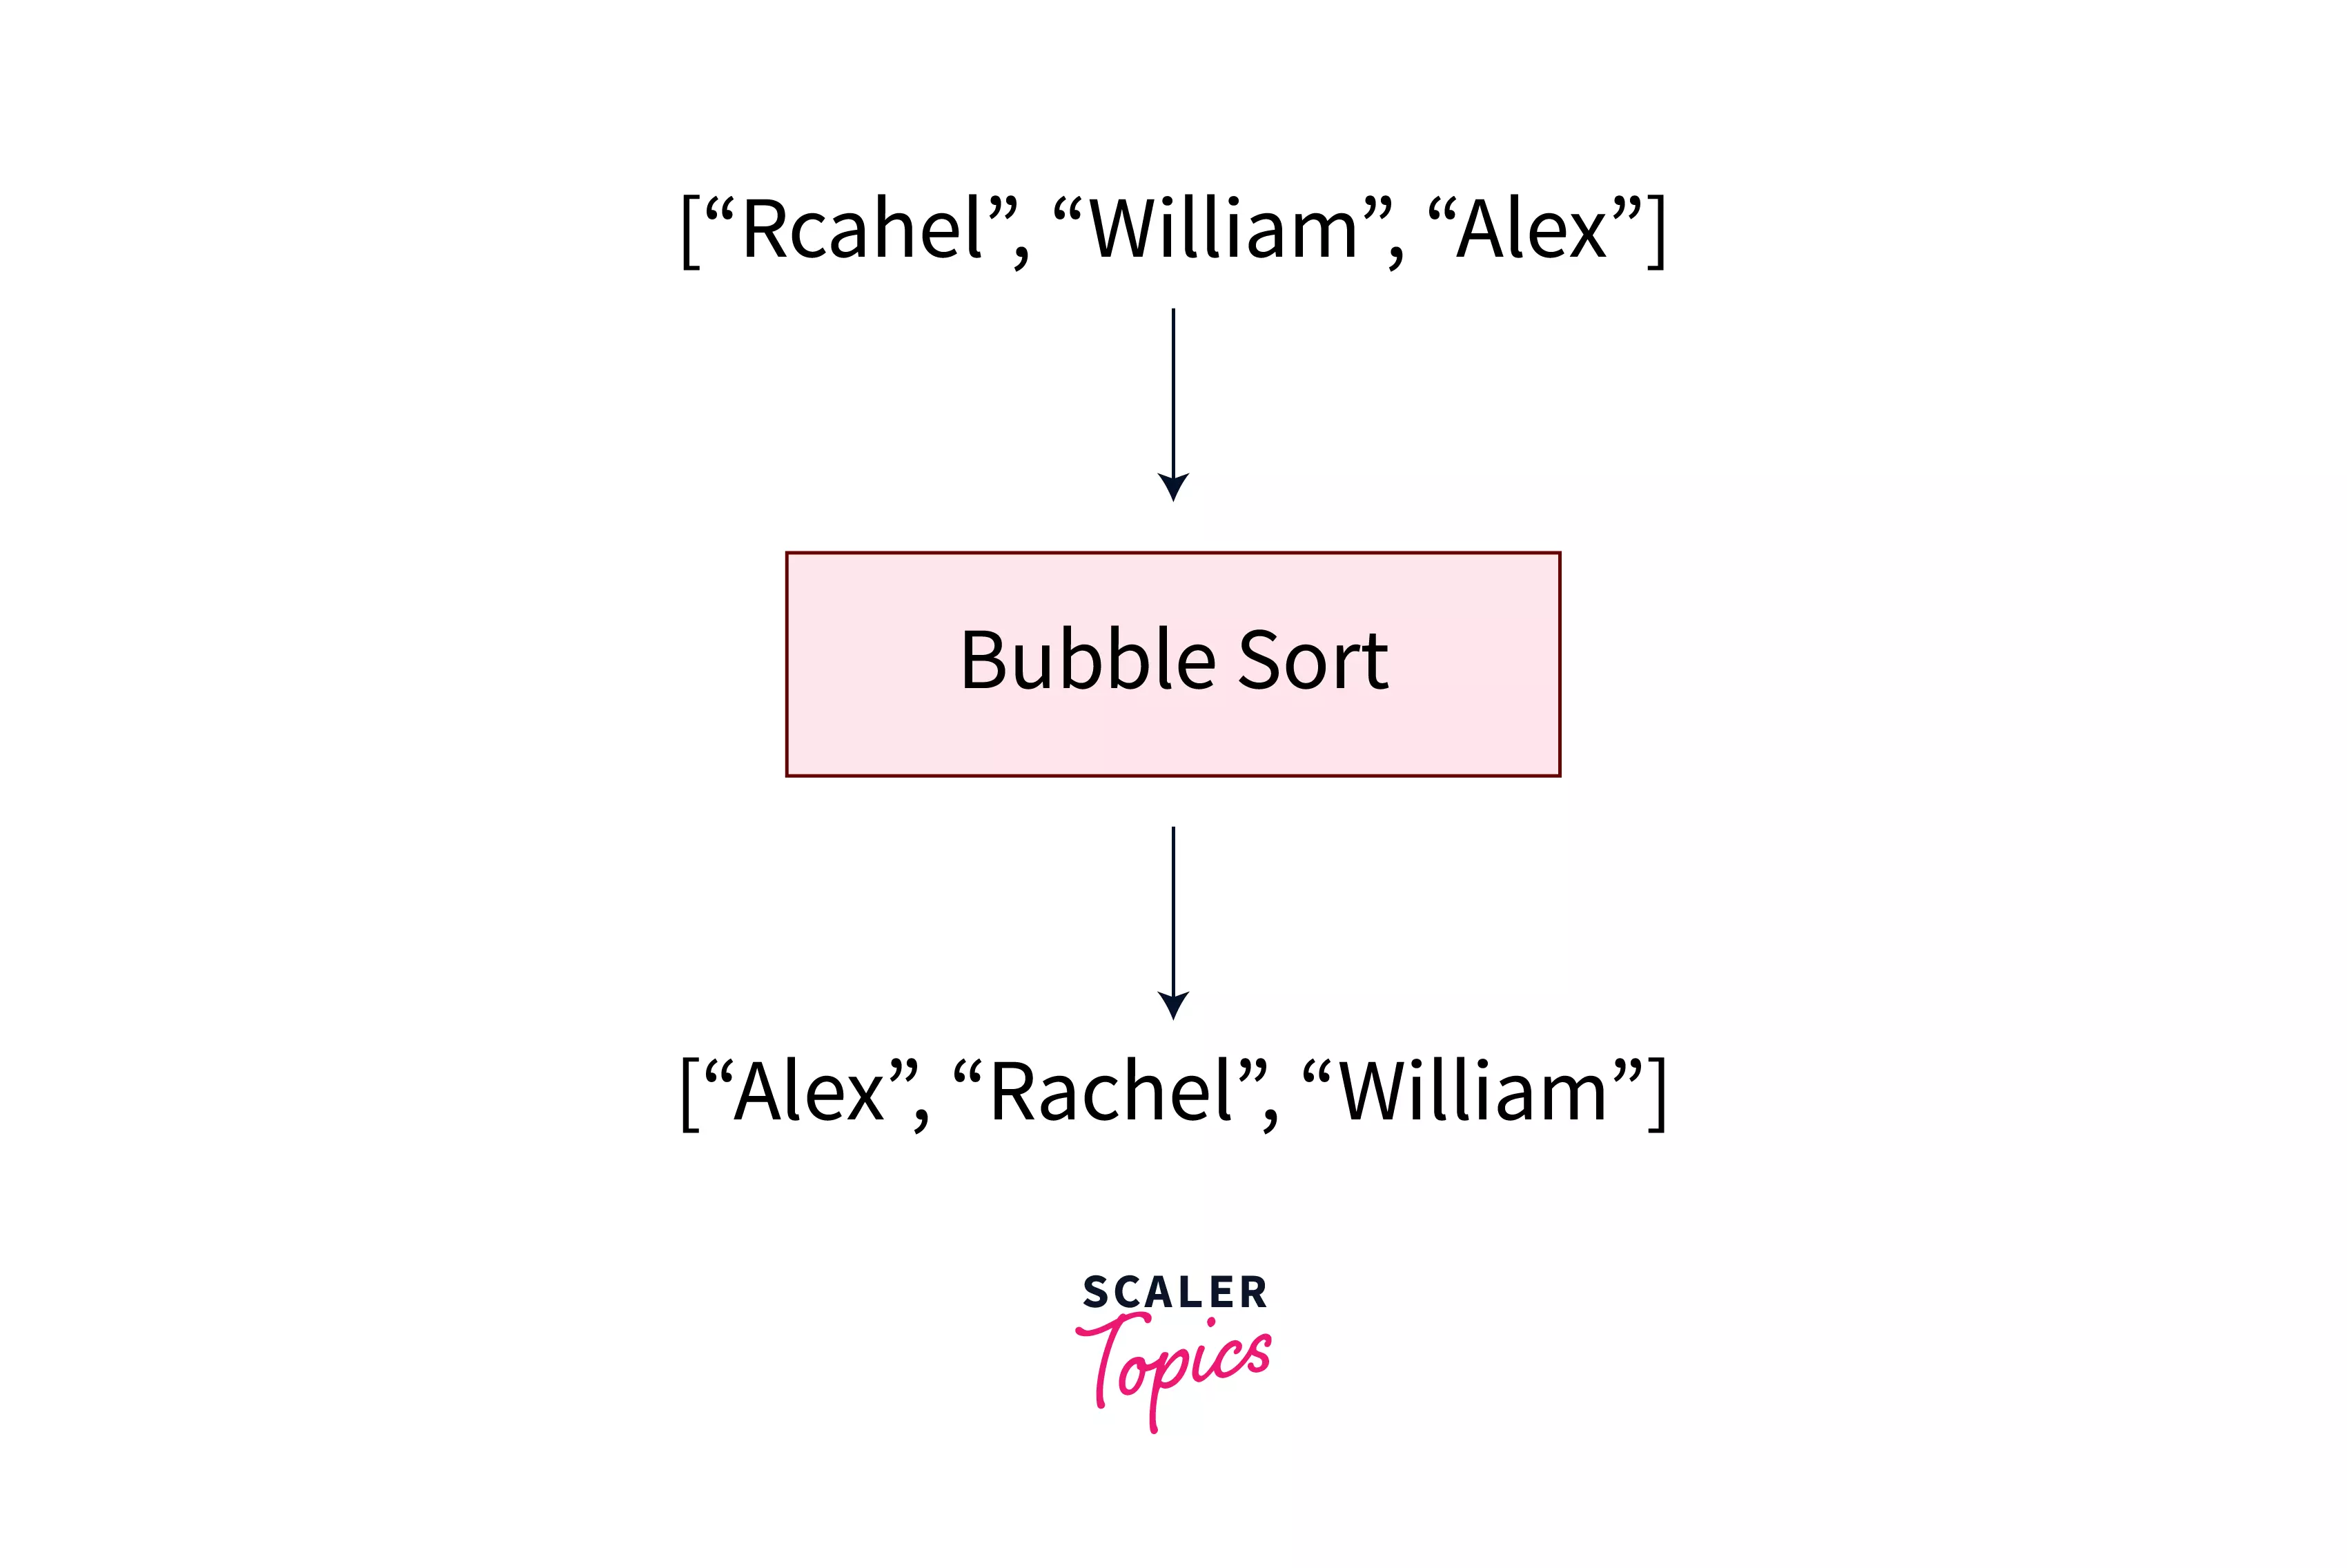 Example of Enhanced Bubble Sort Working Procedure for a Random